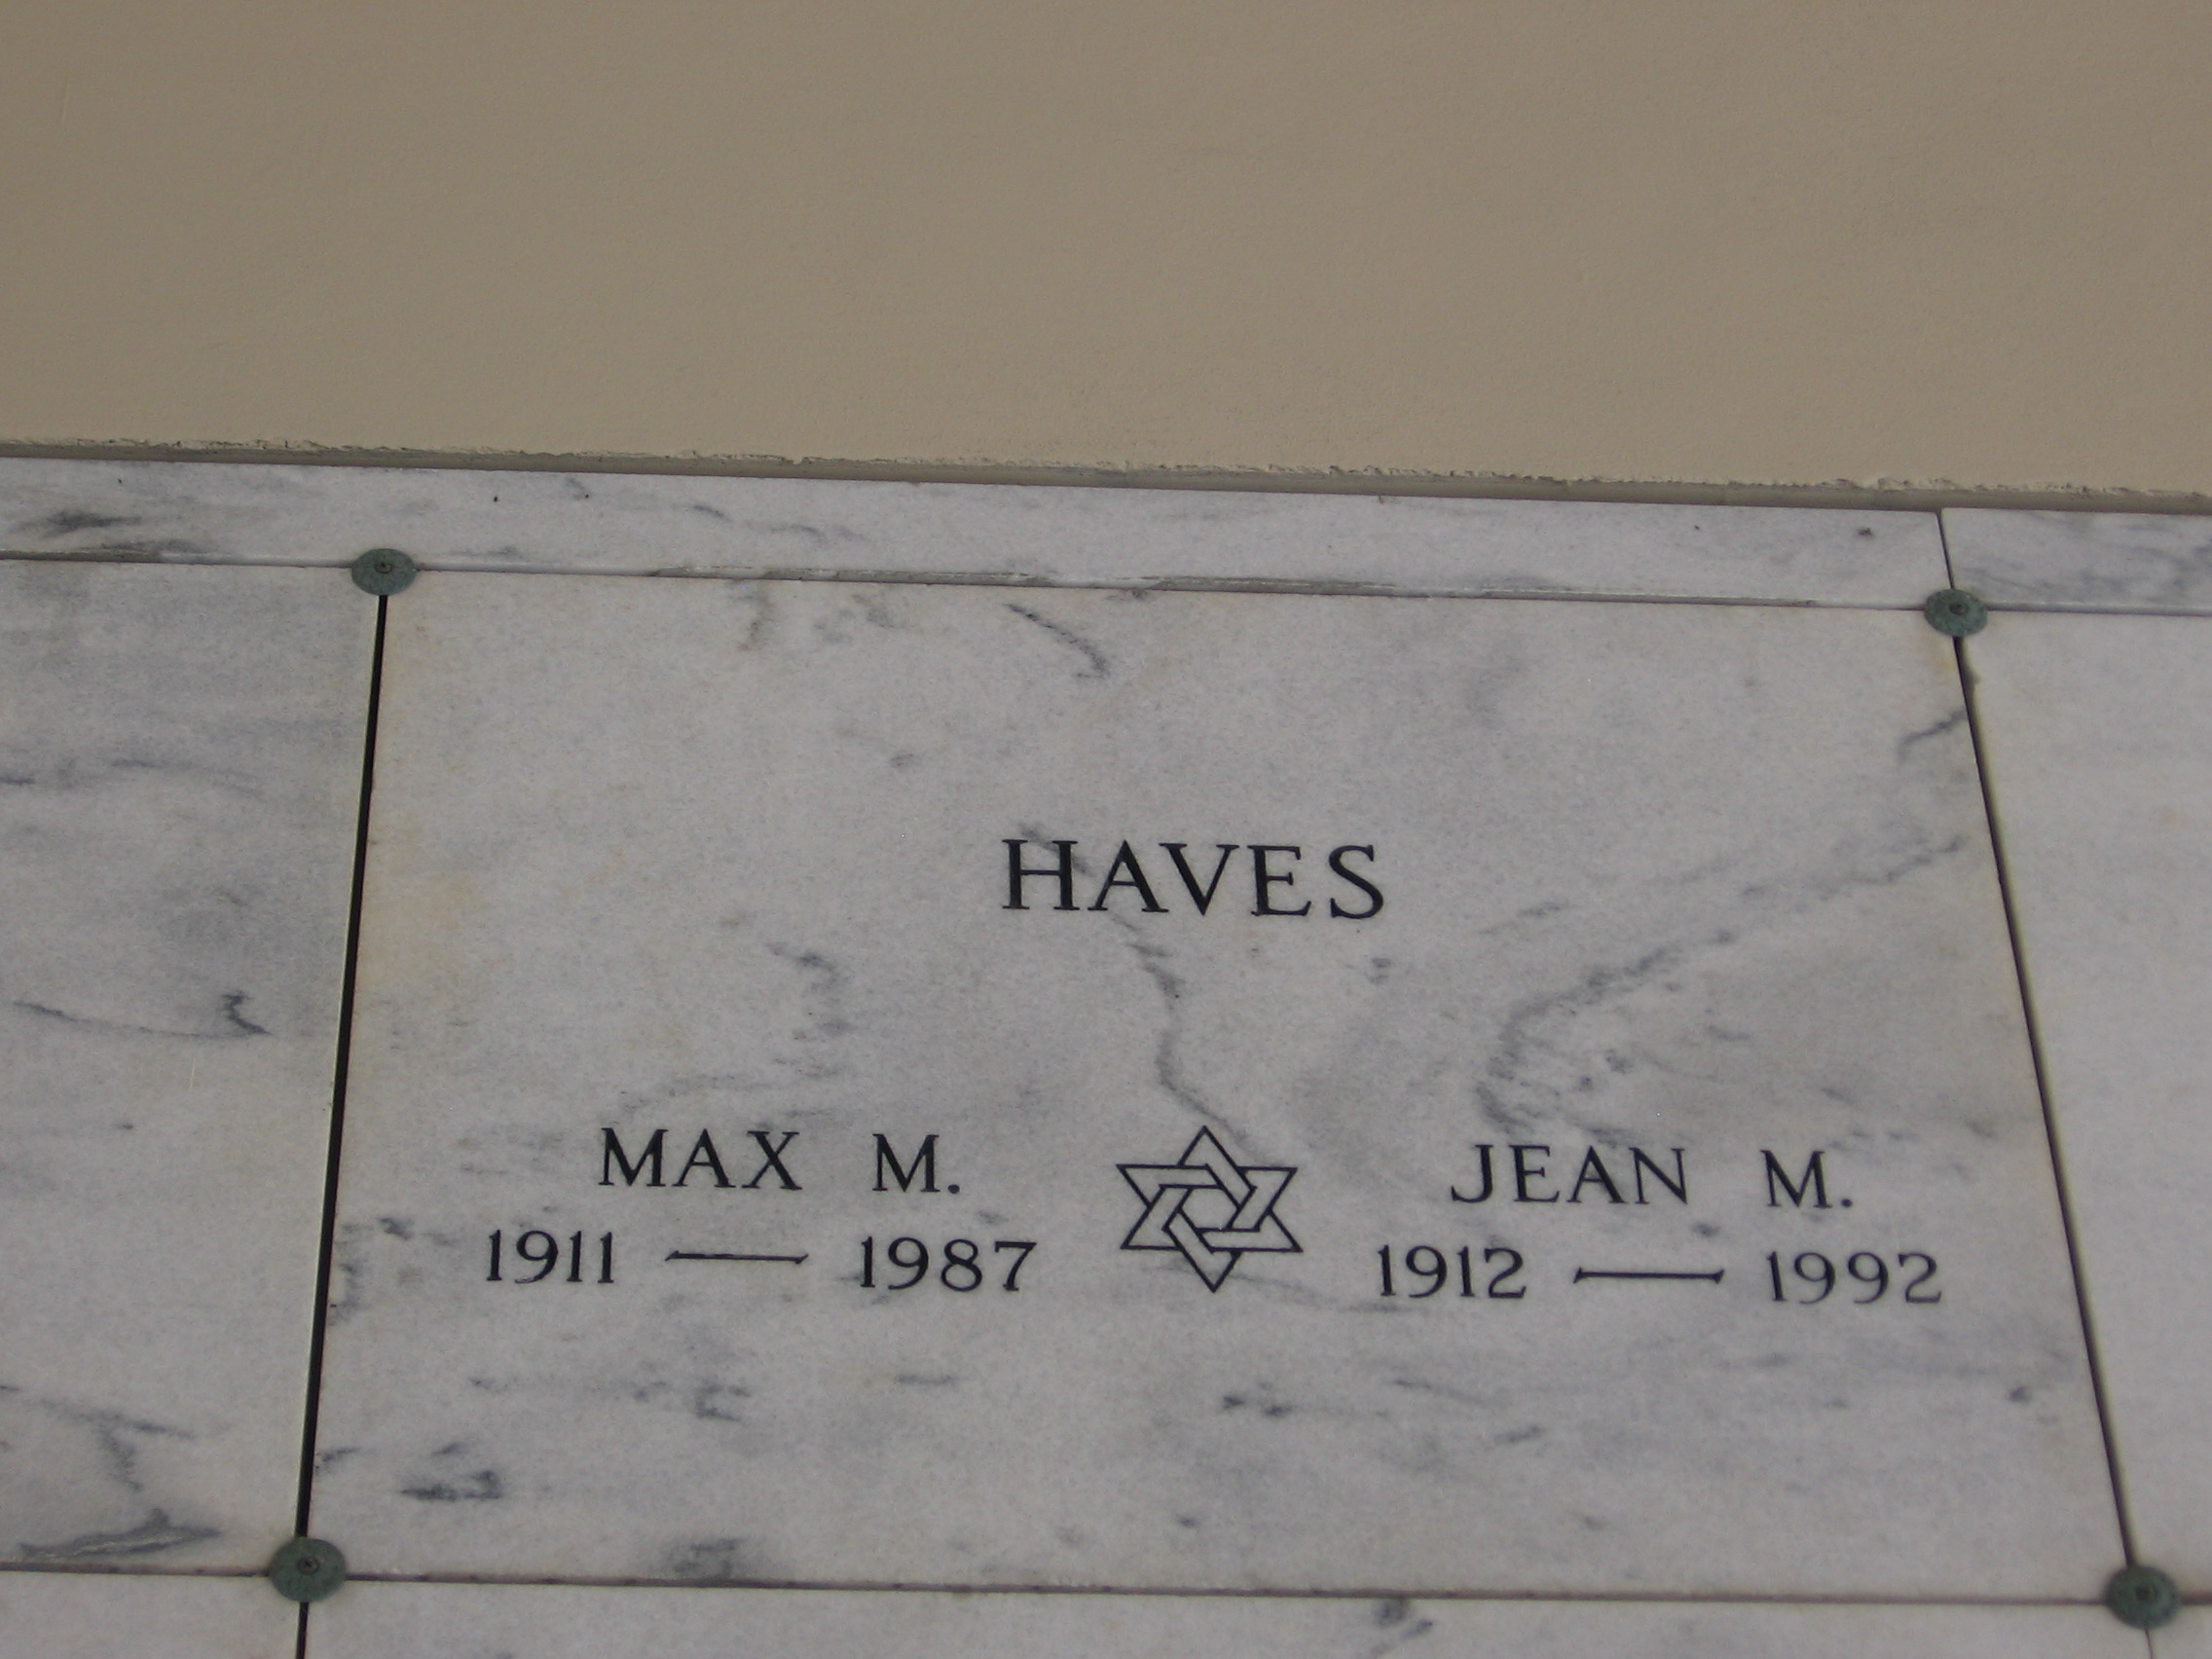 Max M Haves